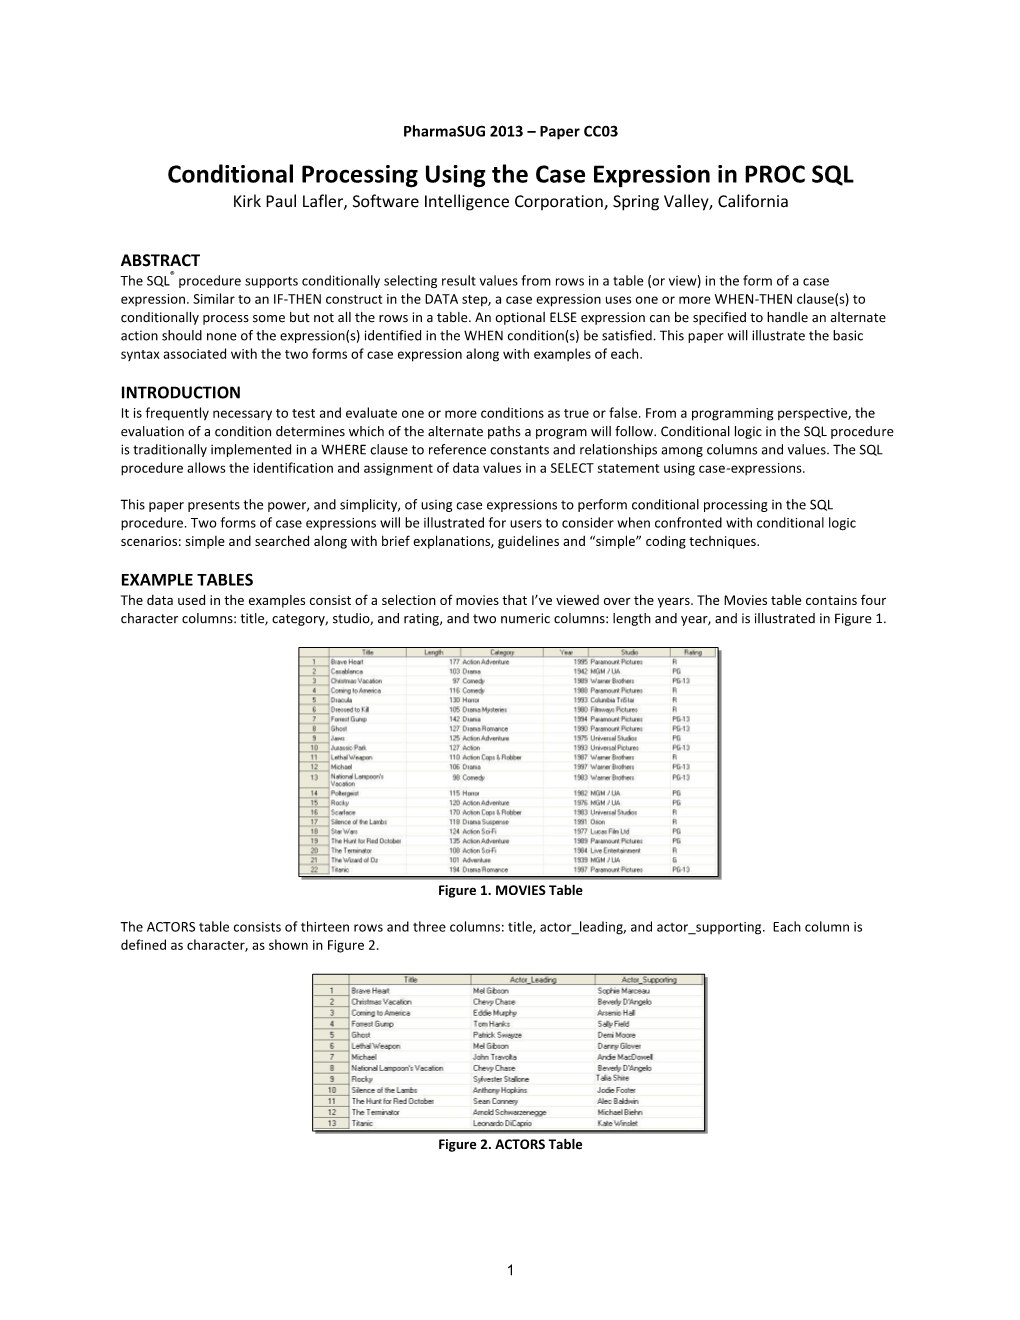 Conditional Processing Using the Case Expression in PROC SQL Kirk Paul Lafler, Software Intelligence Corporation, Spring Valley, California